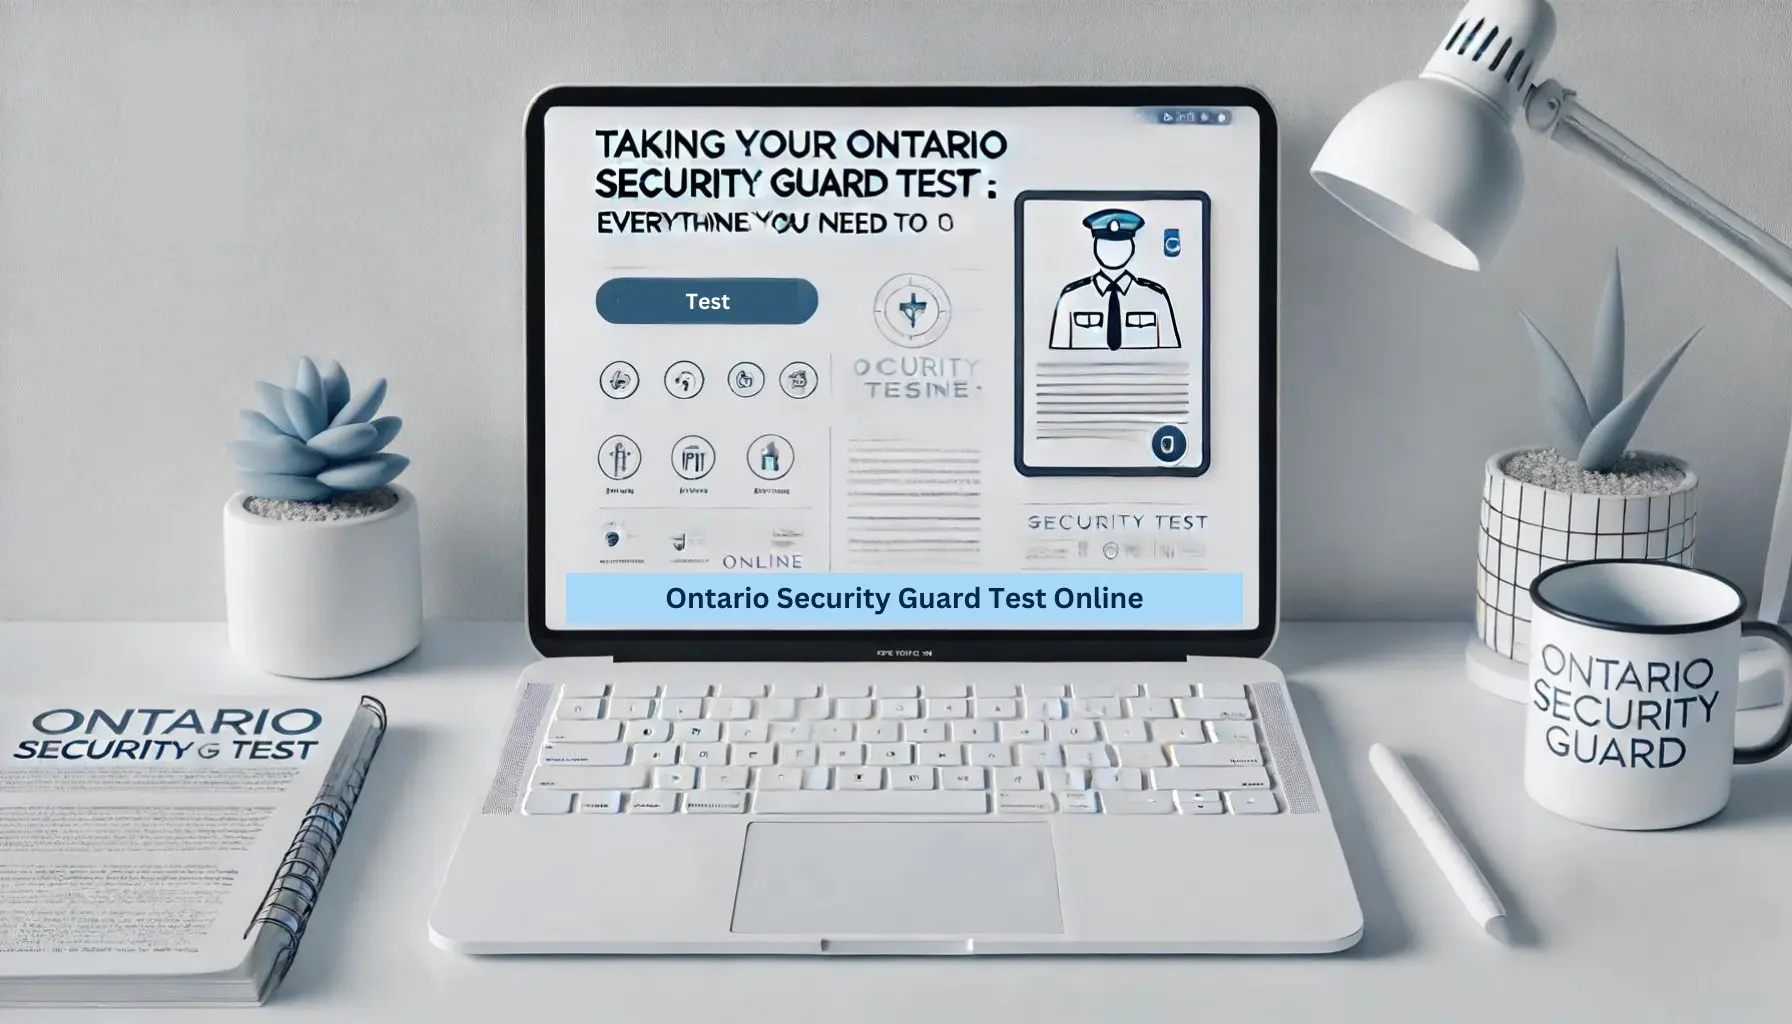 Ontario Security Guard Test Online